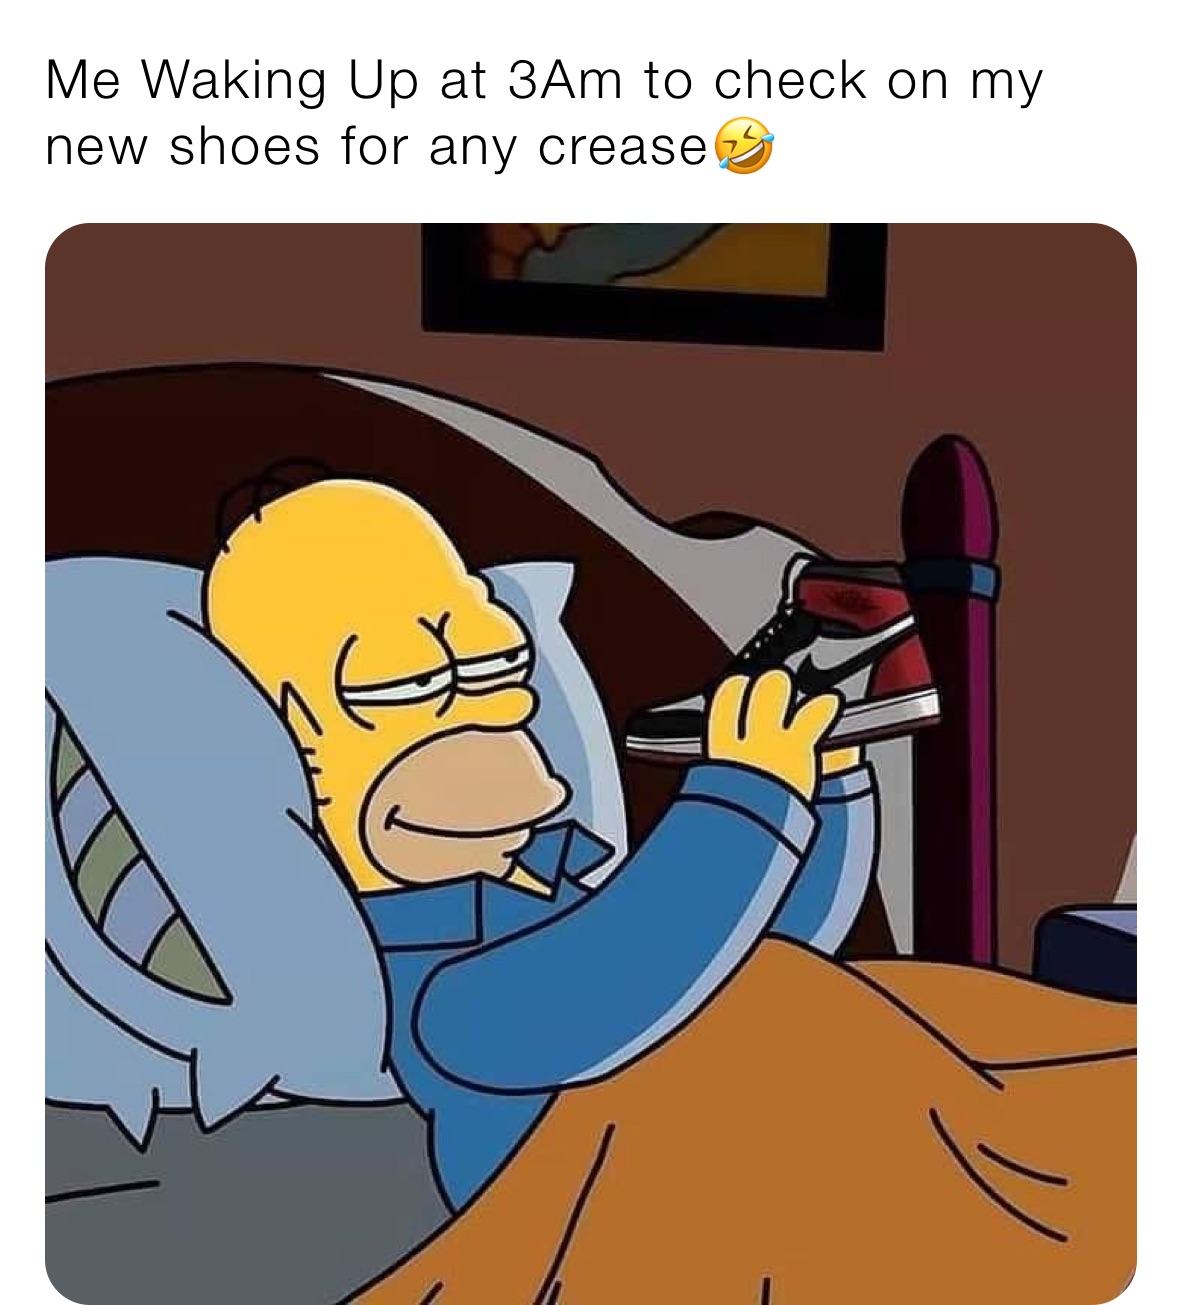 Me Waking Up at 3Am to check on my new shoes for any crease🤣